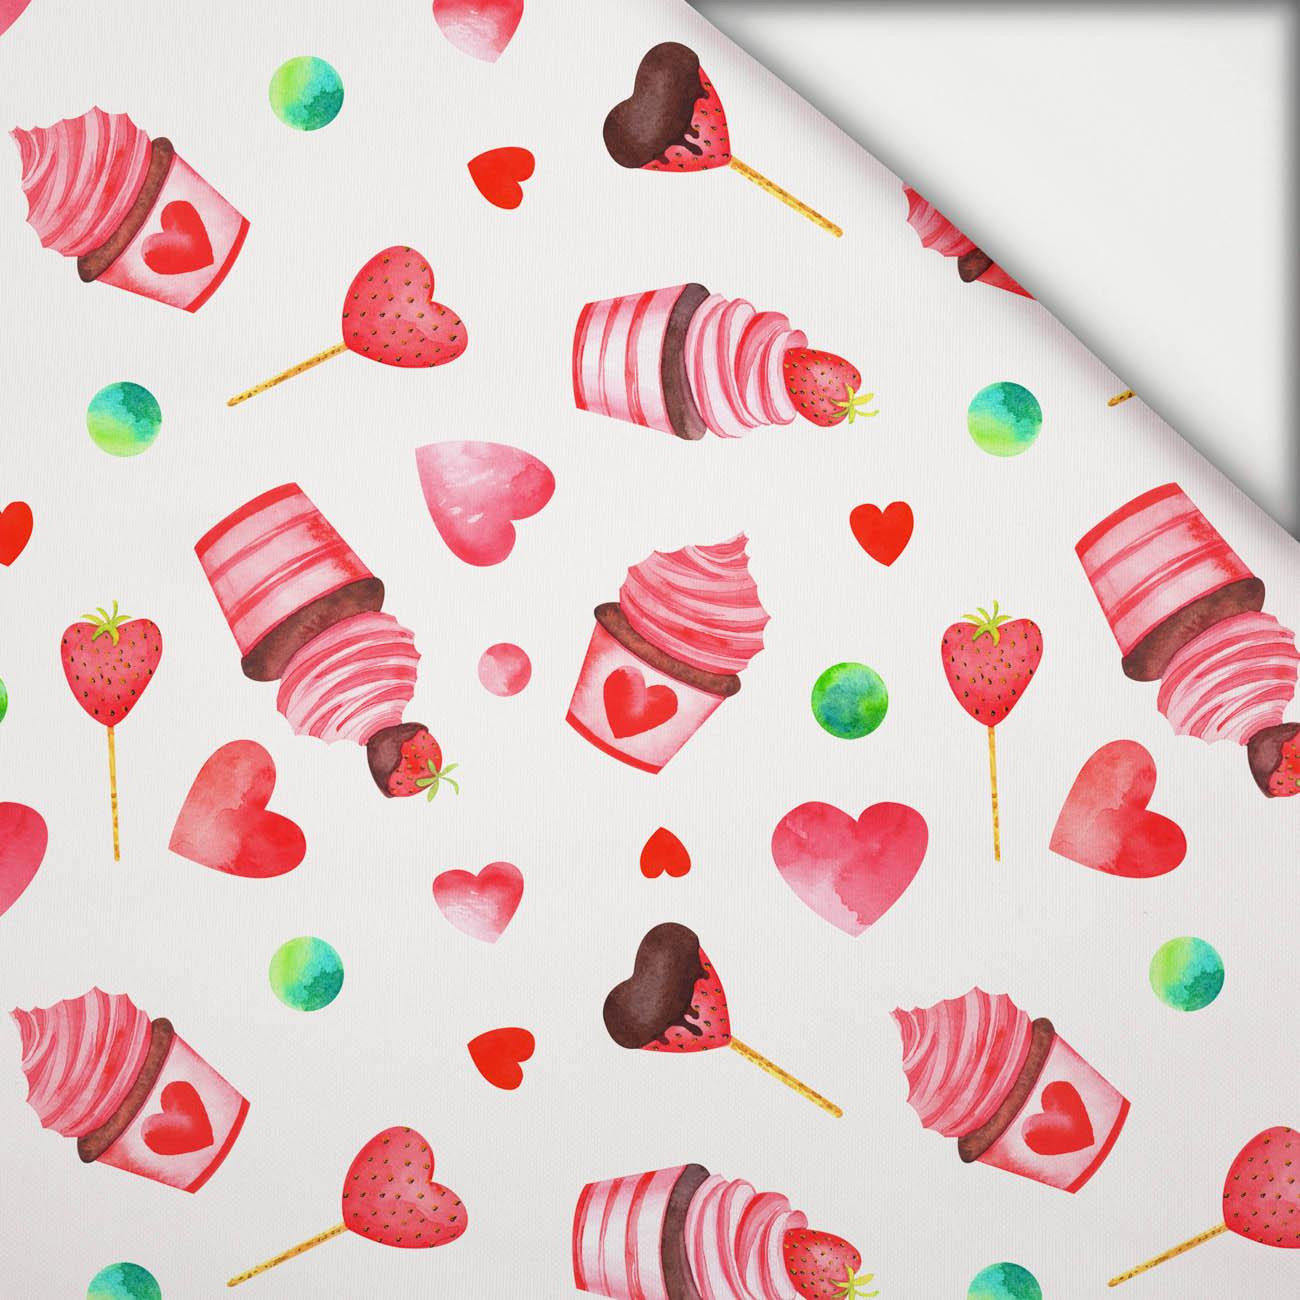 ICE CREAM AND STRAWBERRIES - light brushed knitwear